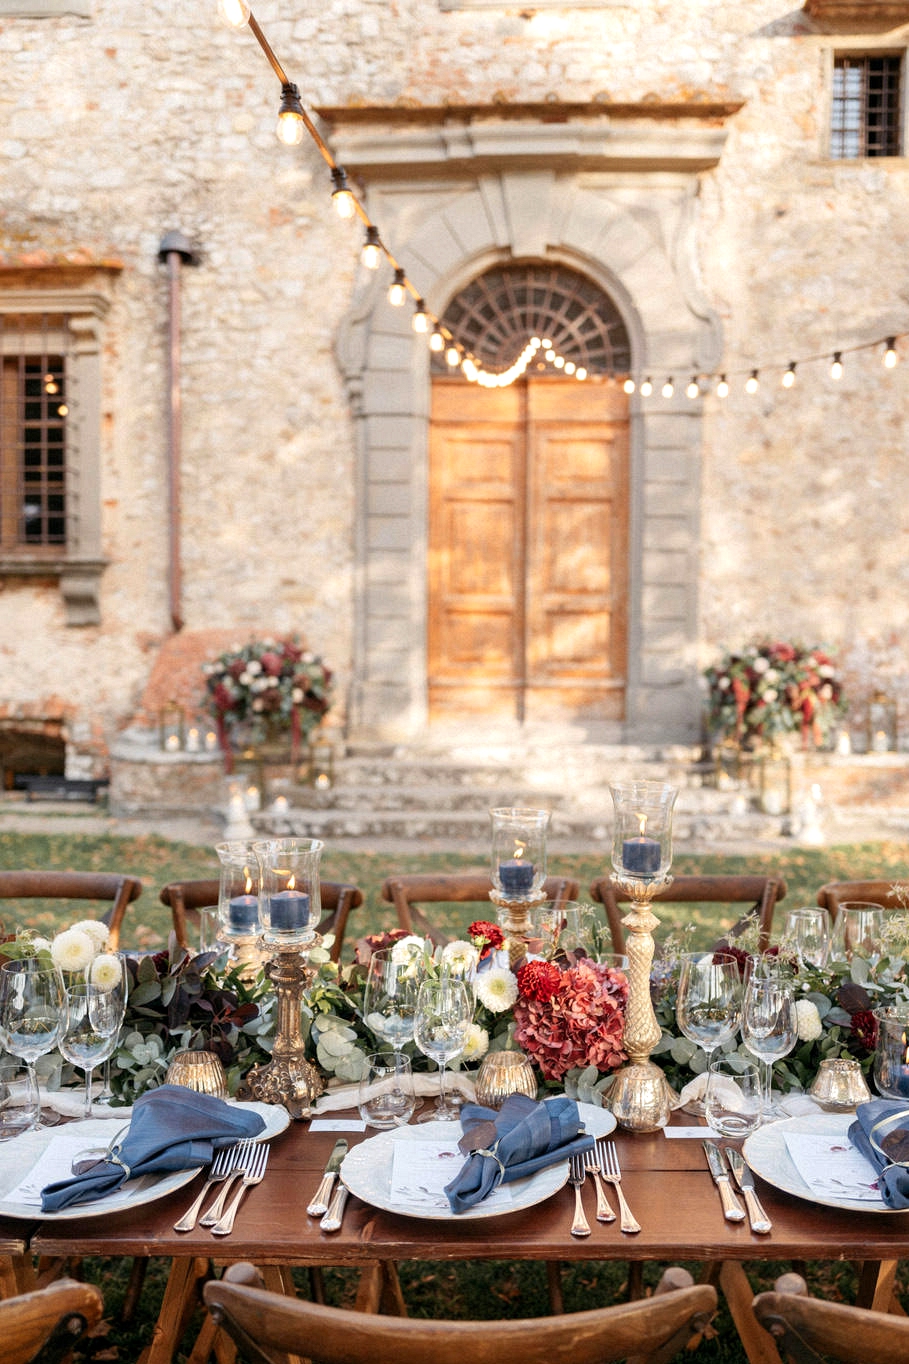 Wedding with 40 Guests in Italy